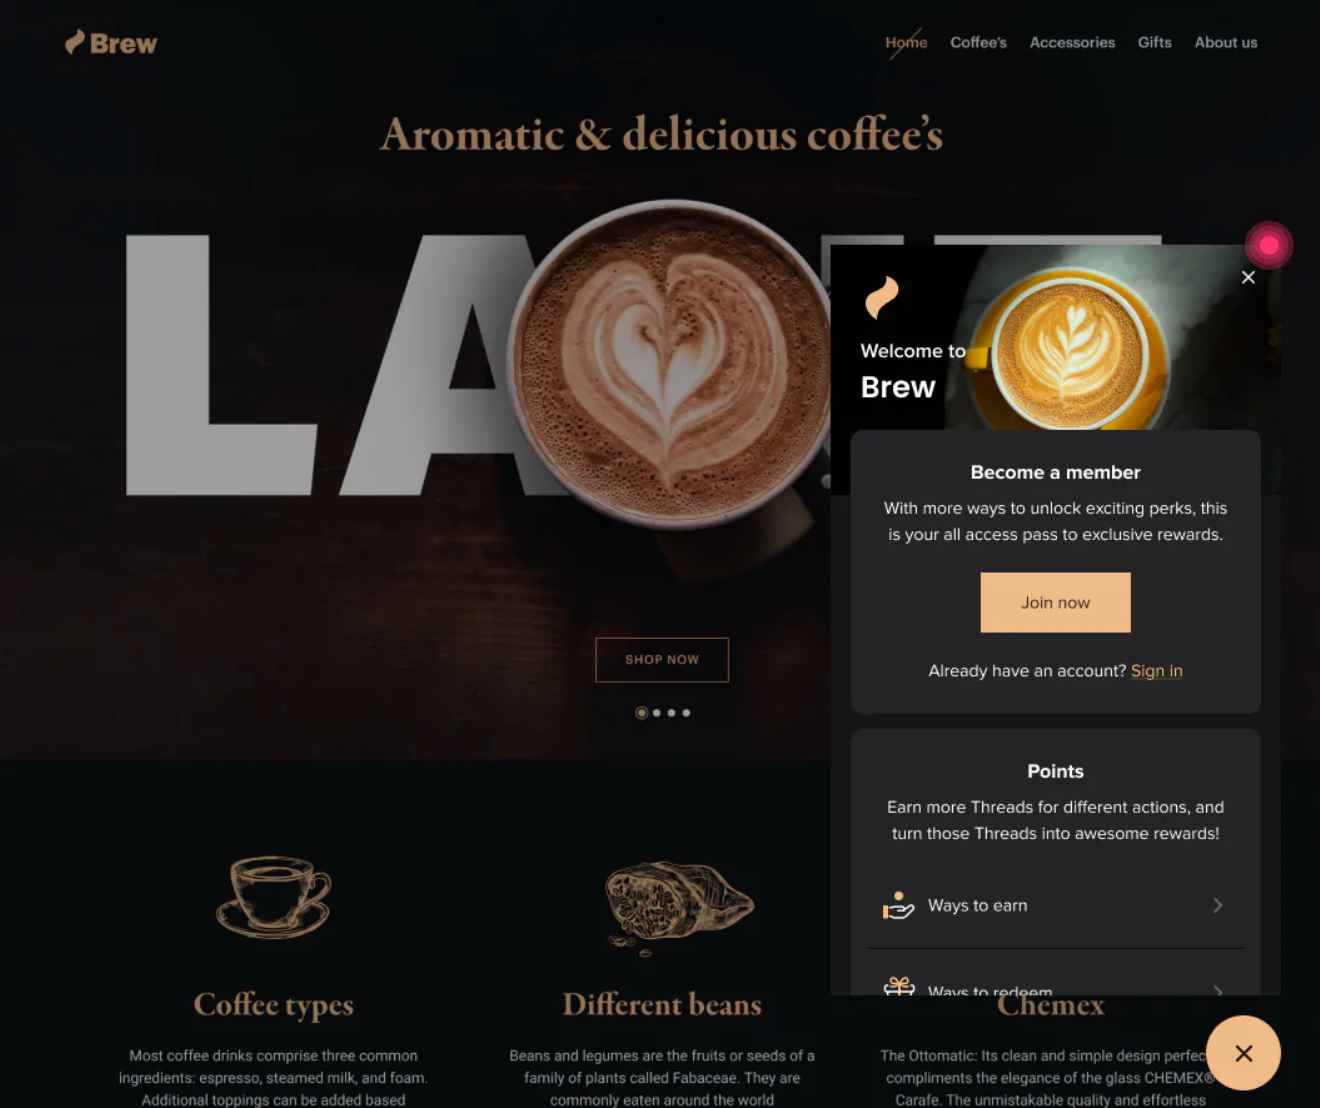 Coffee company’s website homepage with embedded Smile app UI prompting to join the loyalty program.